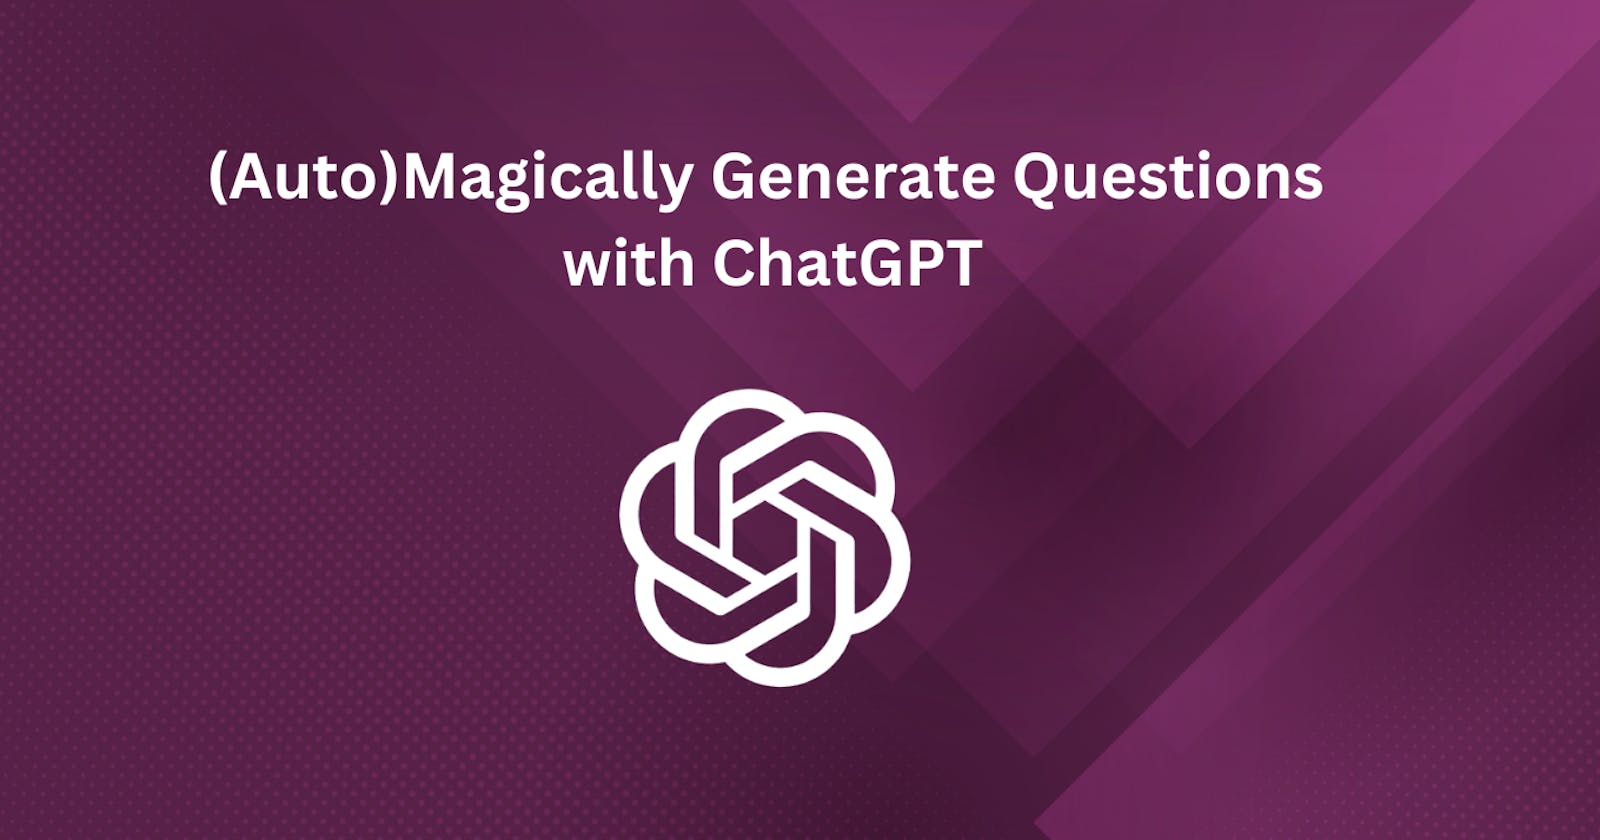 (Auto)Magically Generate Questions with ChatGPT